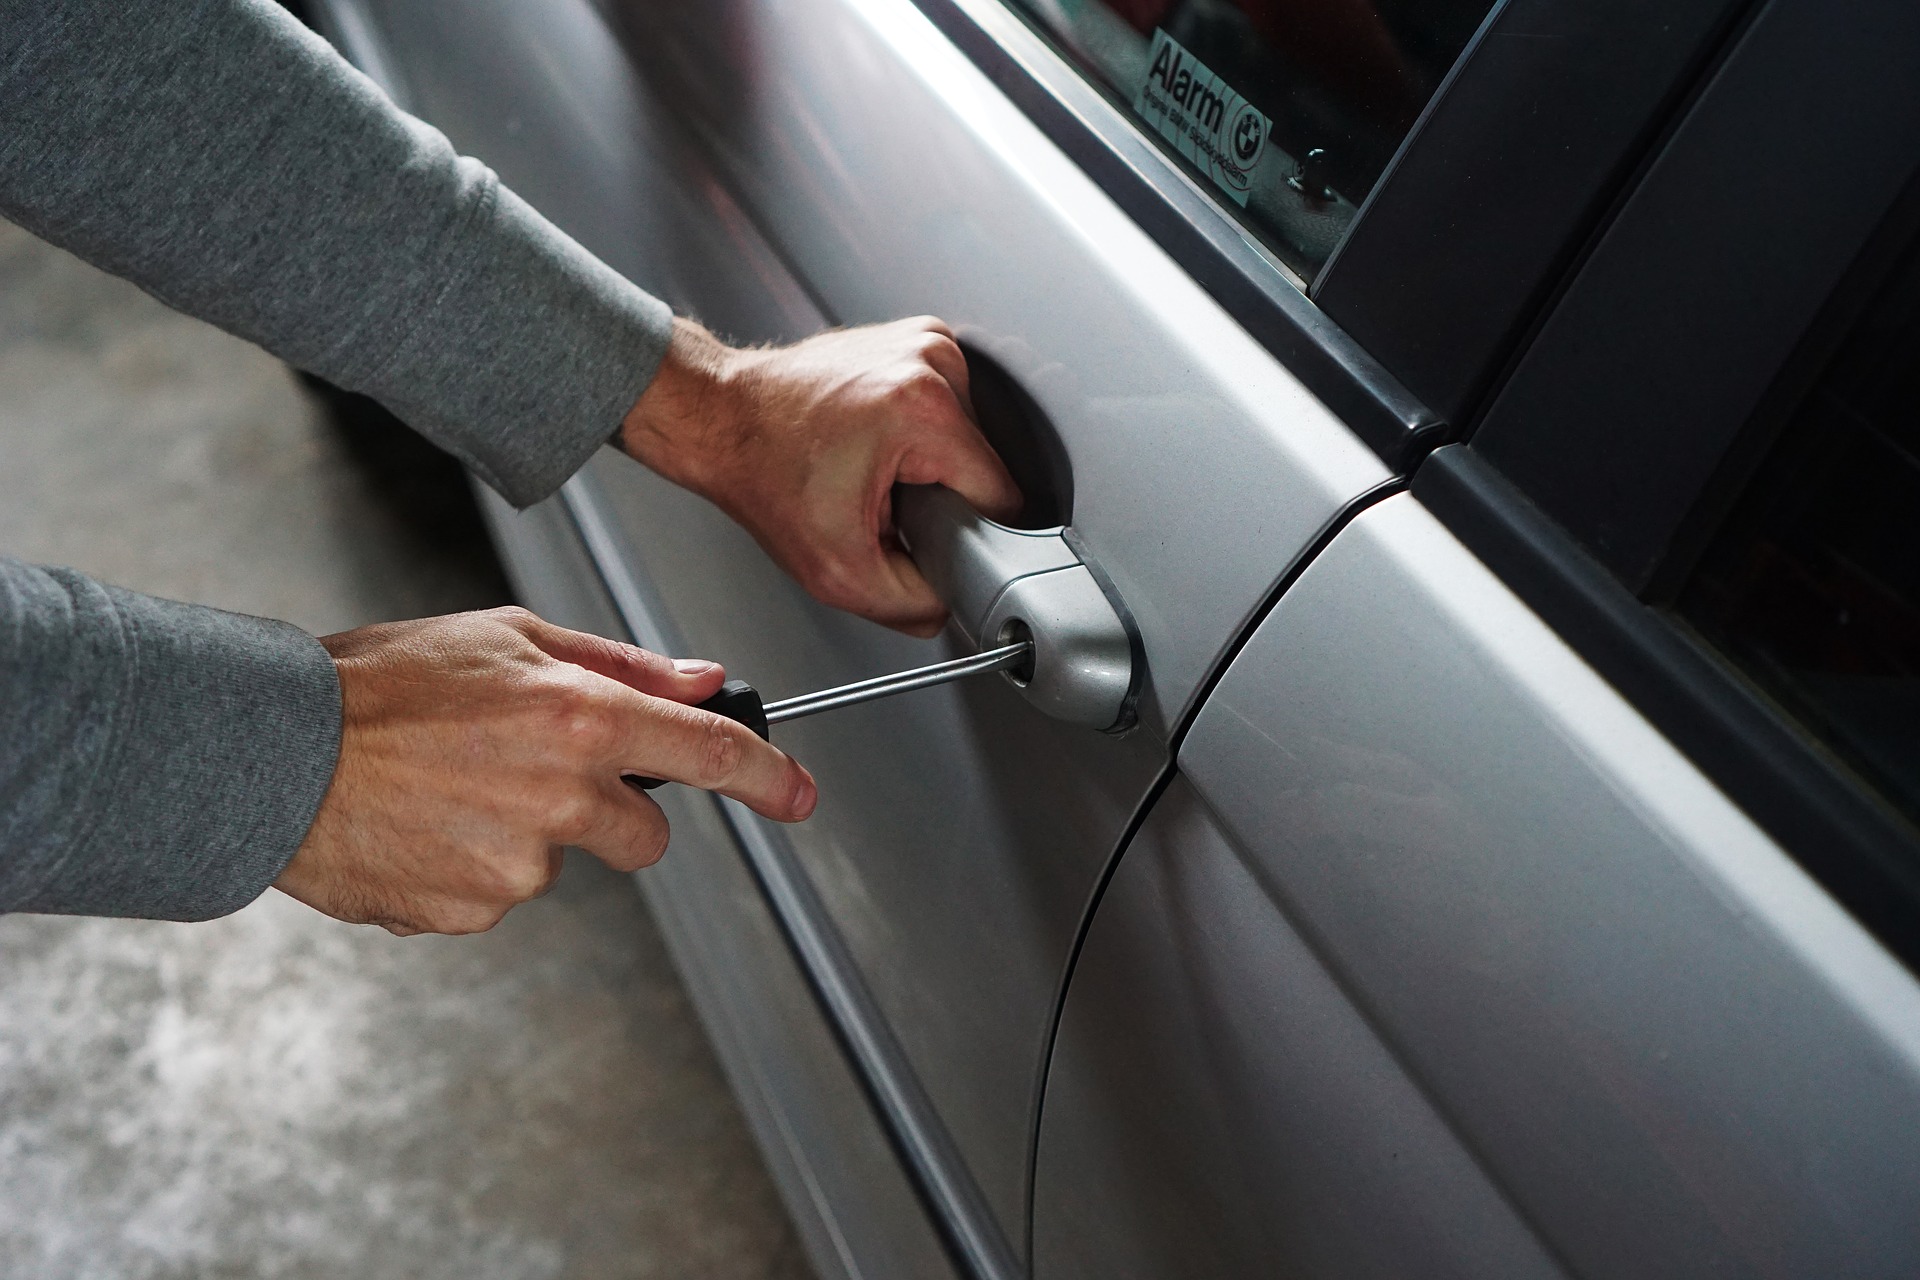 How to pick a car trunk lock